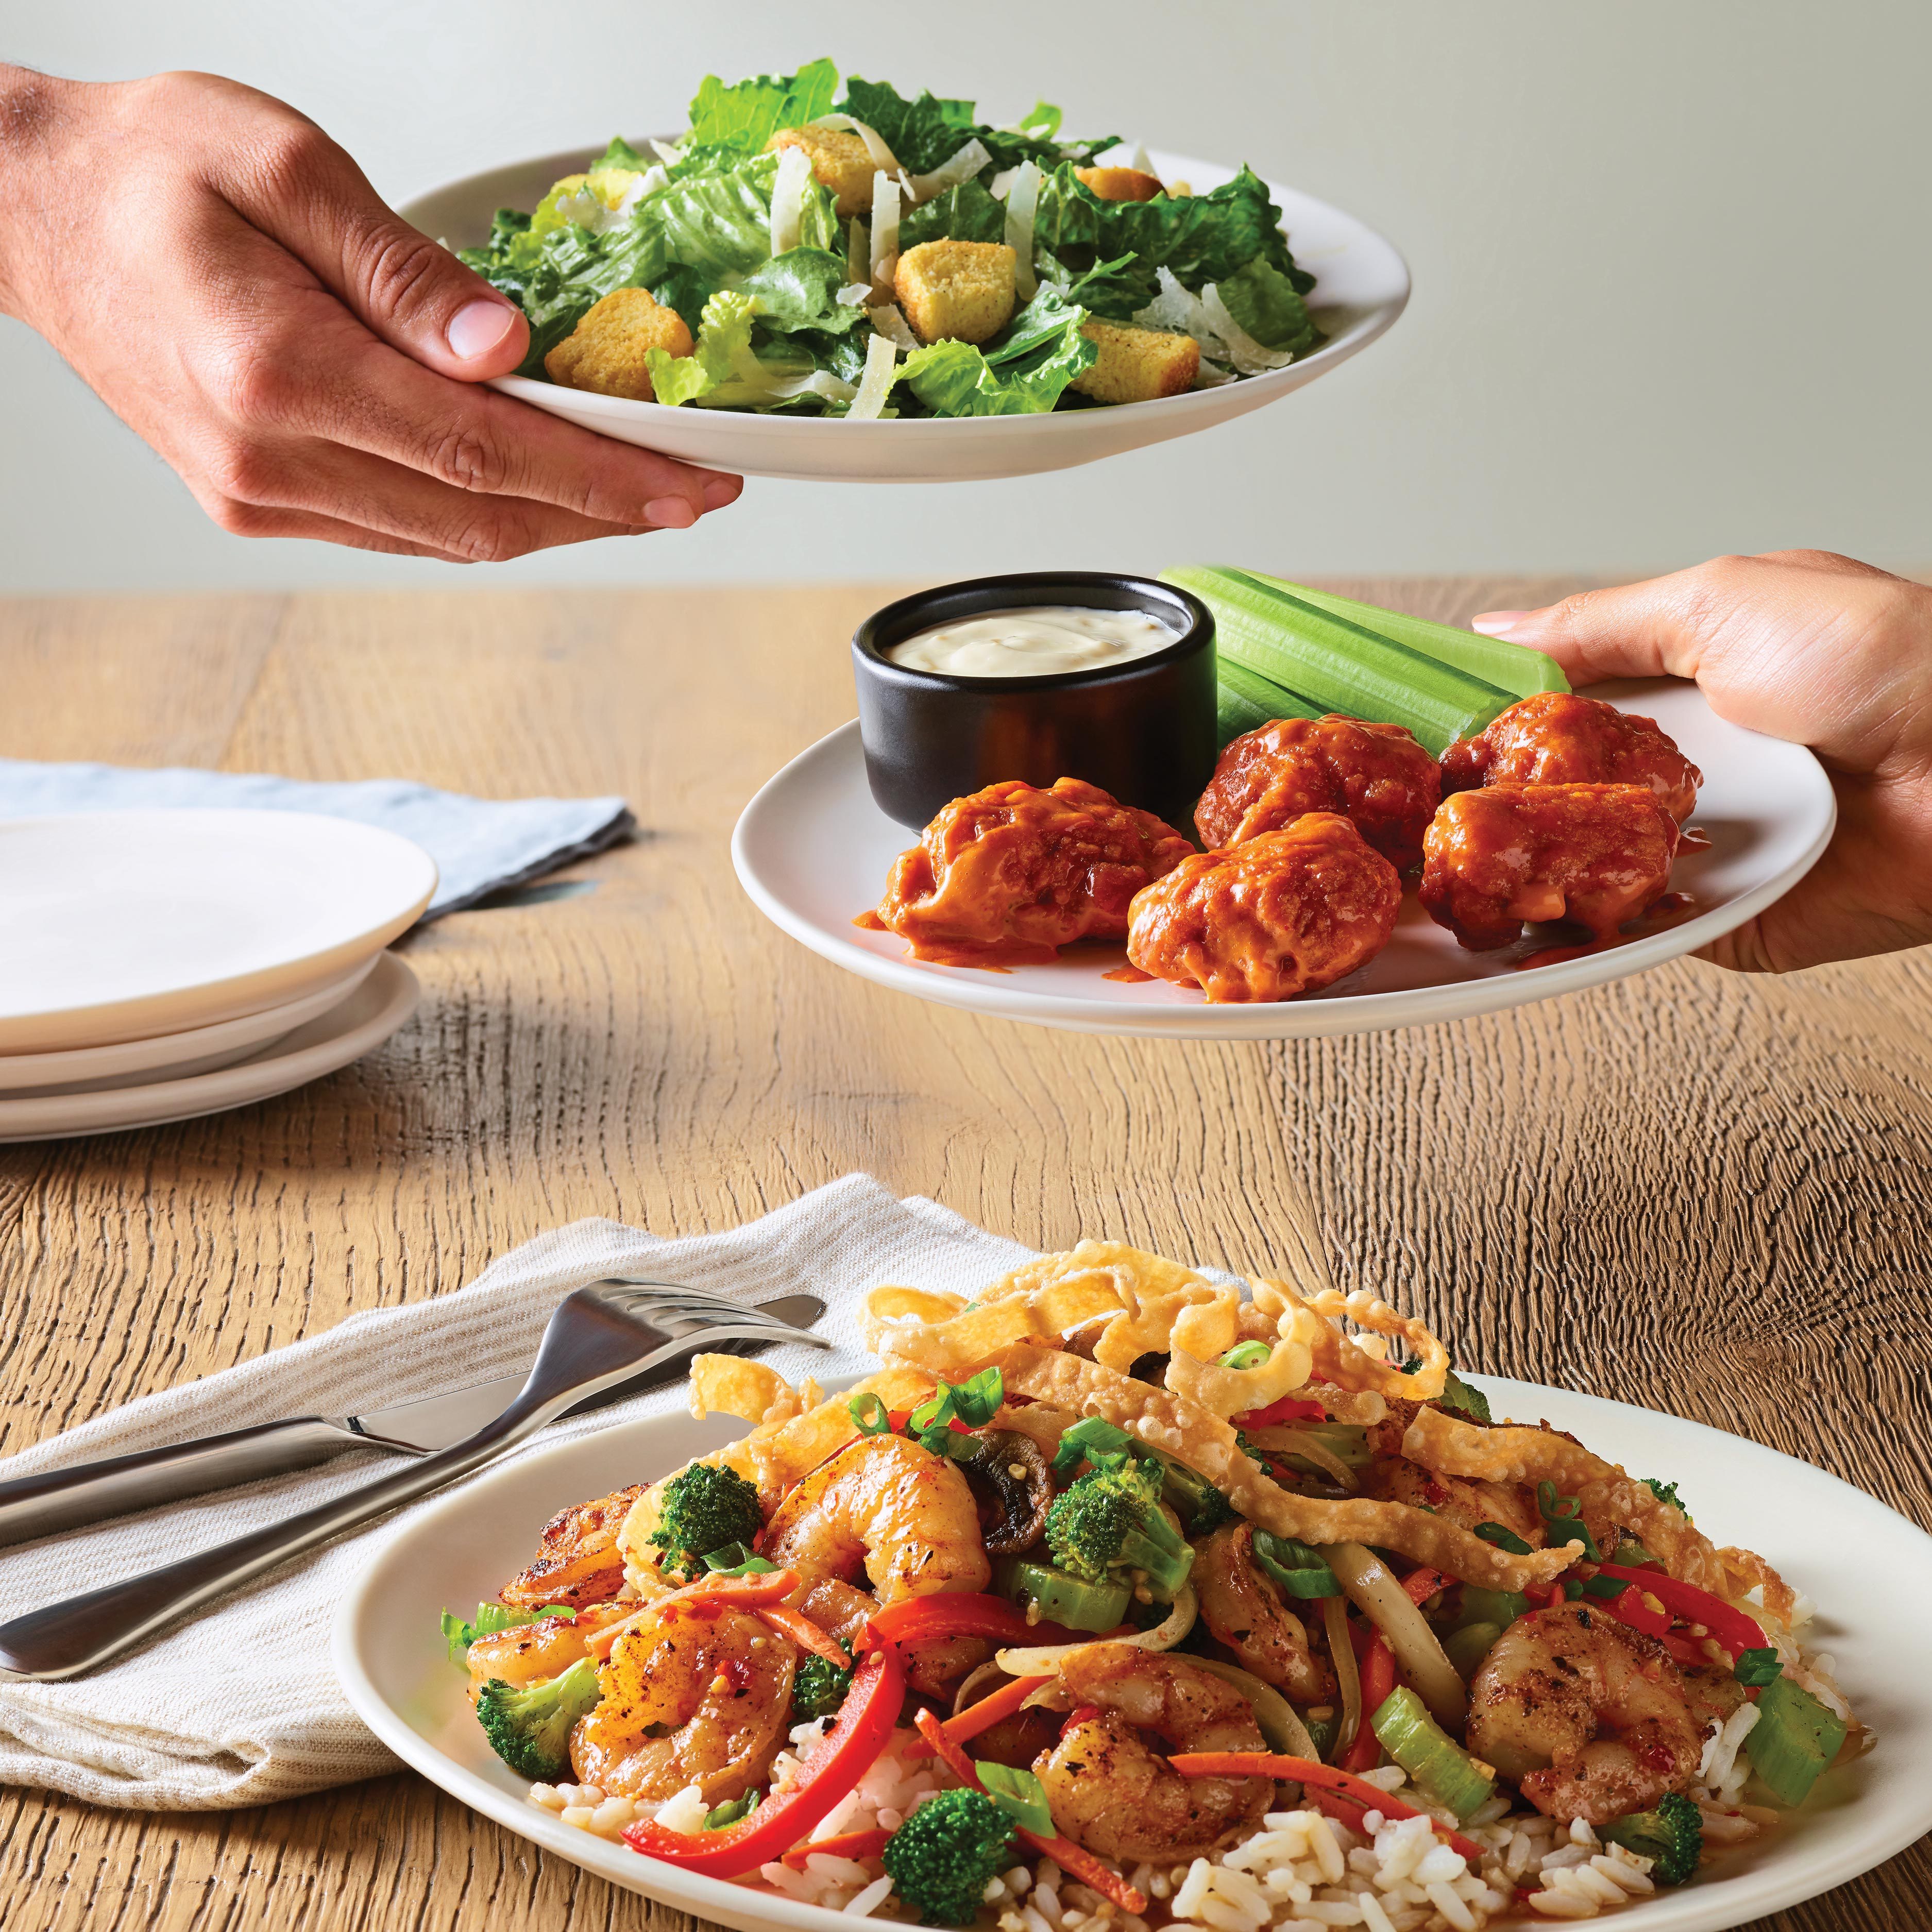 Applebee’s® 3Course Meal is Back! Business Wire